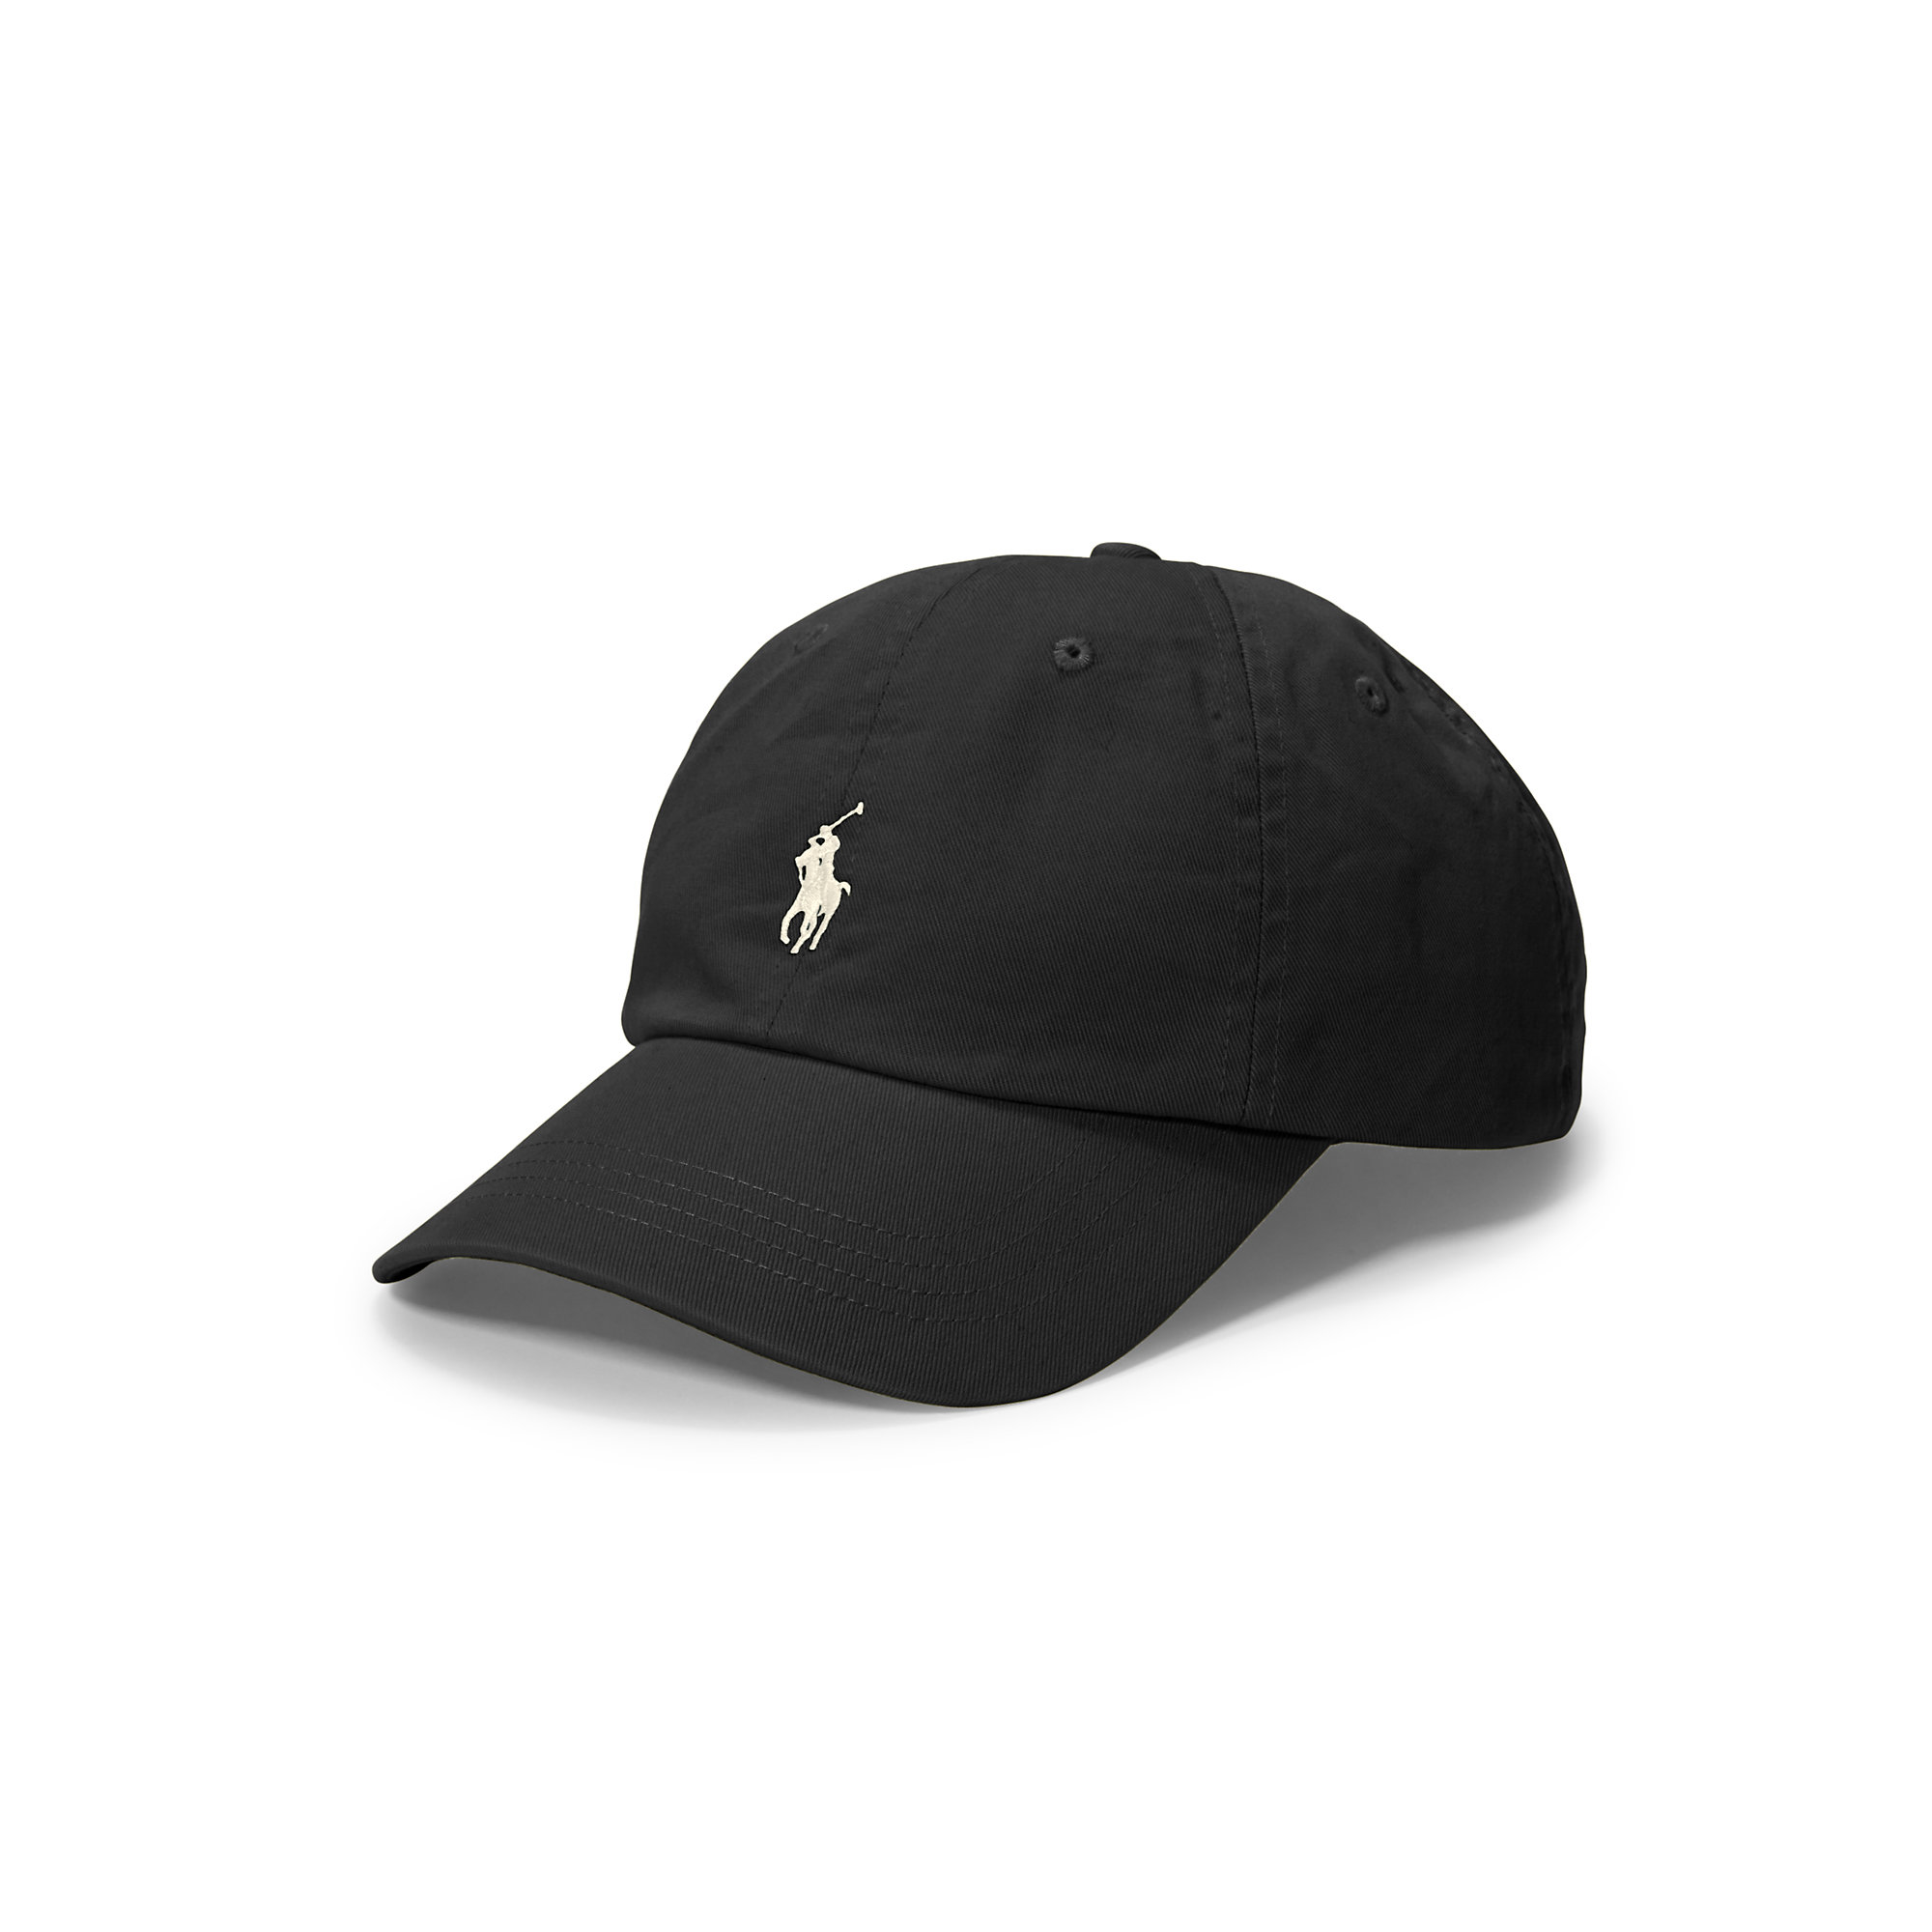 white and black polo hat